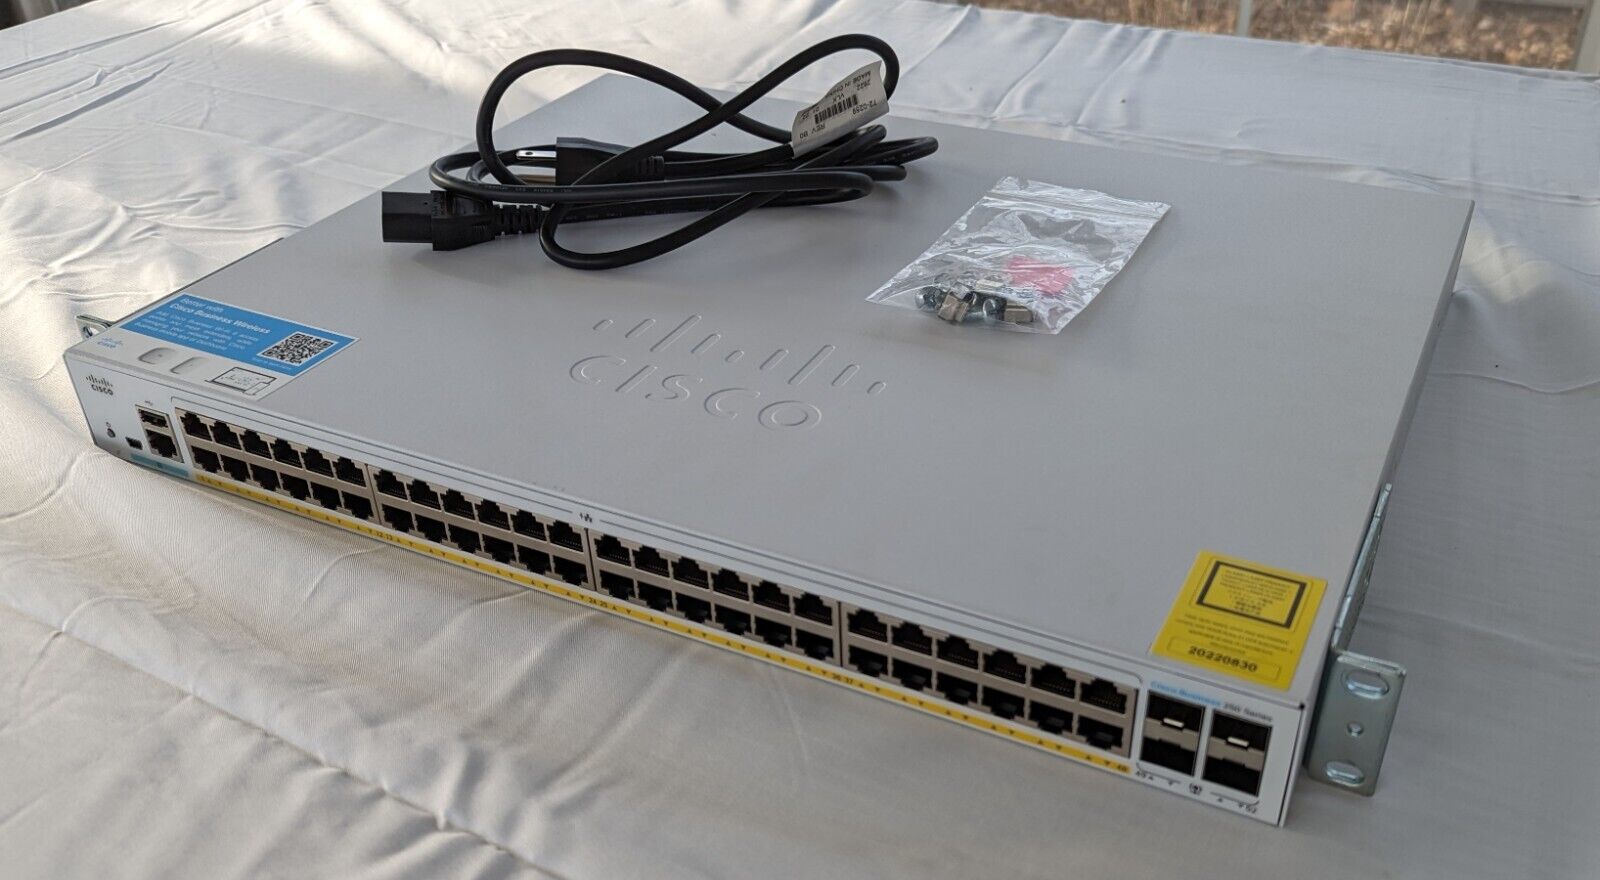 Cisco 250 CBS250-48P-4G Ethernet Switch PoE+ - Very Lightly Used